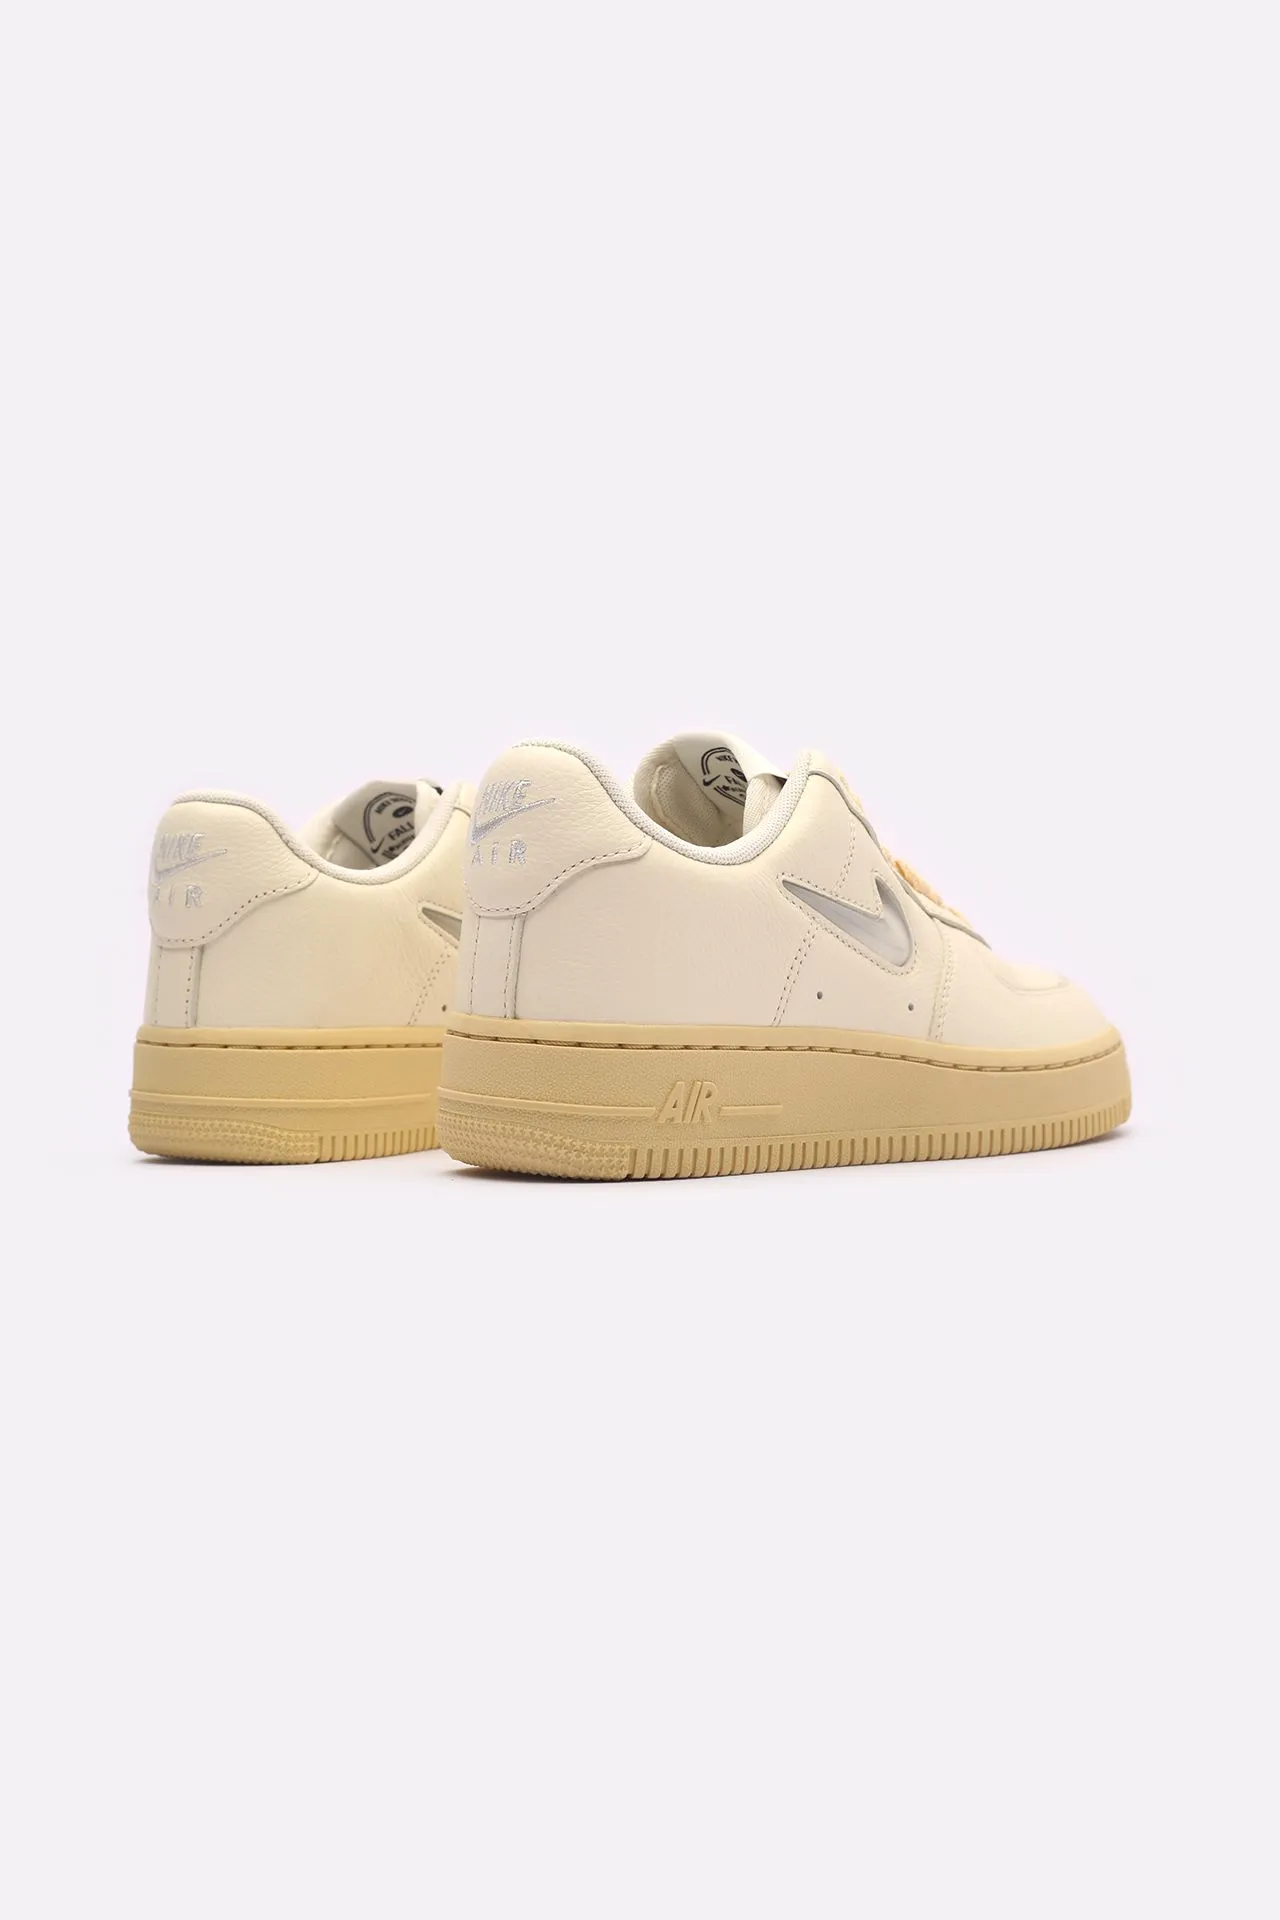 nike womans airforce 1